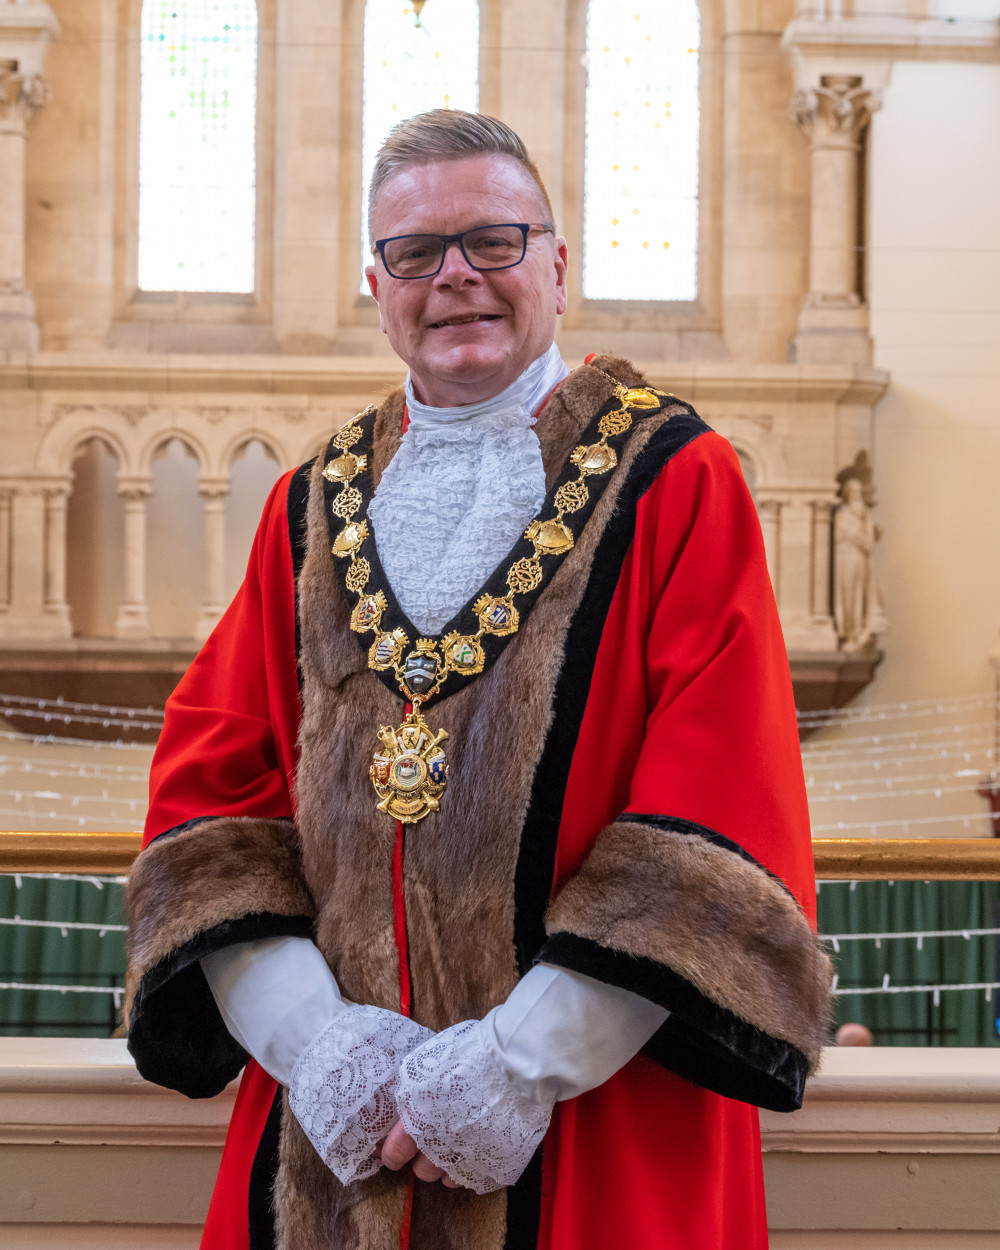 Current town mayor, Cllr Rob Moreton, will hand over the chain of office to his successor after a triumphant year in office (Congleton Town Council).